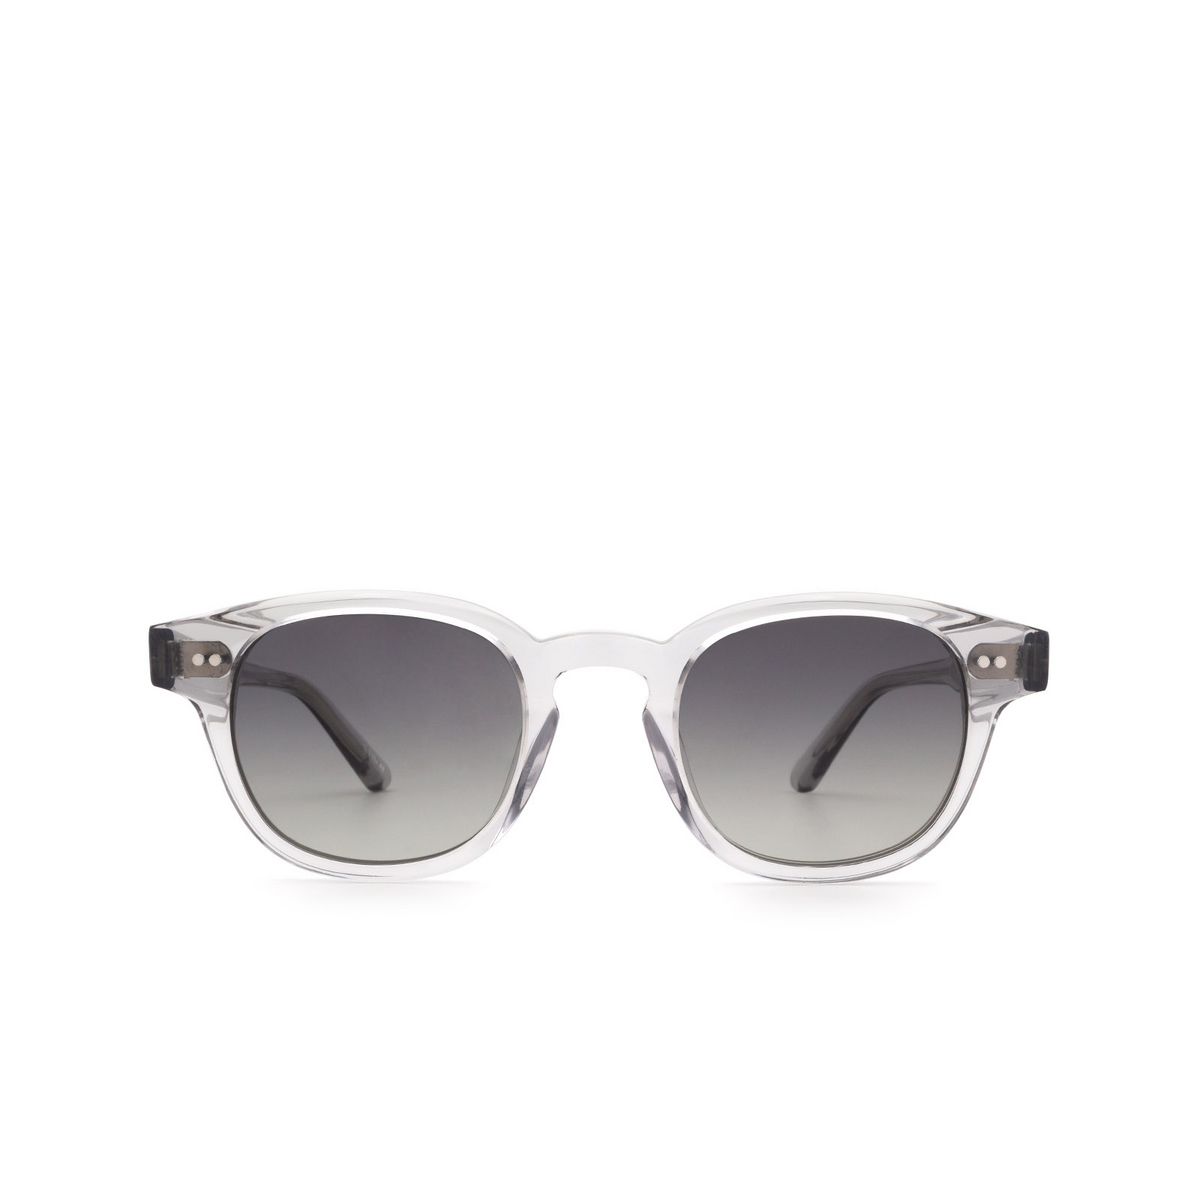 Chimi® Square Sunglasses: 01 color Grey - front view.